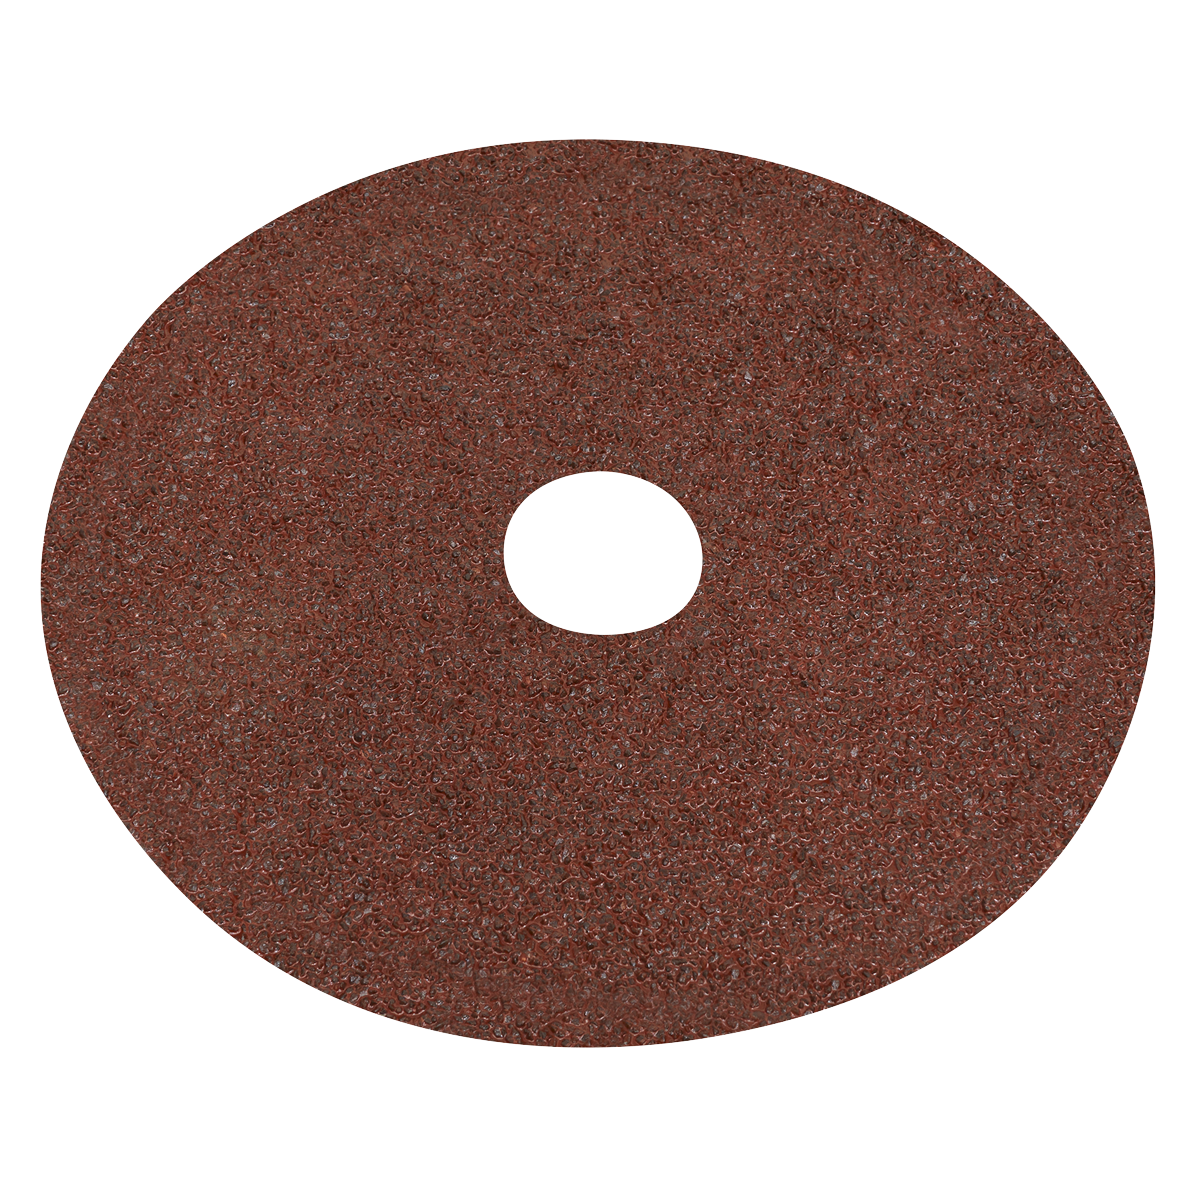 Fibre Backed Disc Ø125mm - 24Grit Pack of 25 - WSD524 - Farming Parts